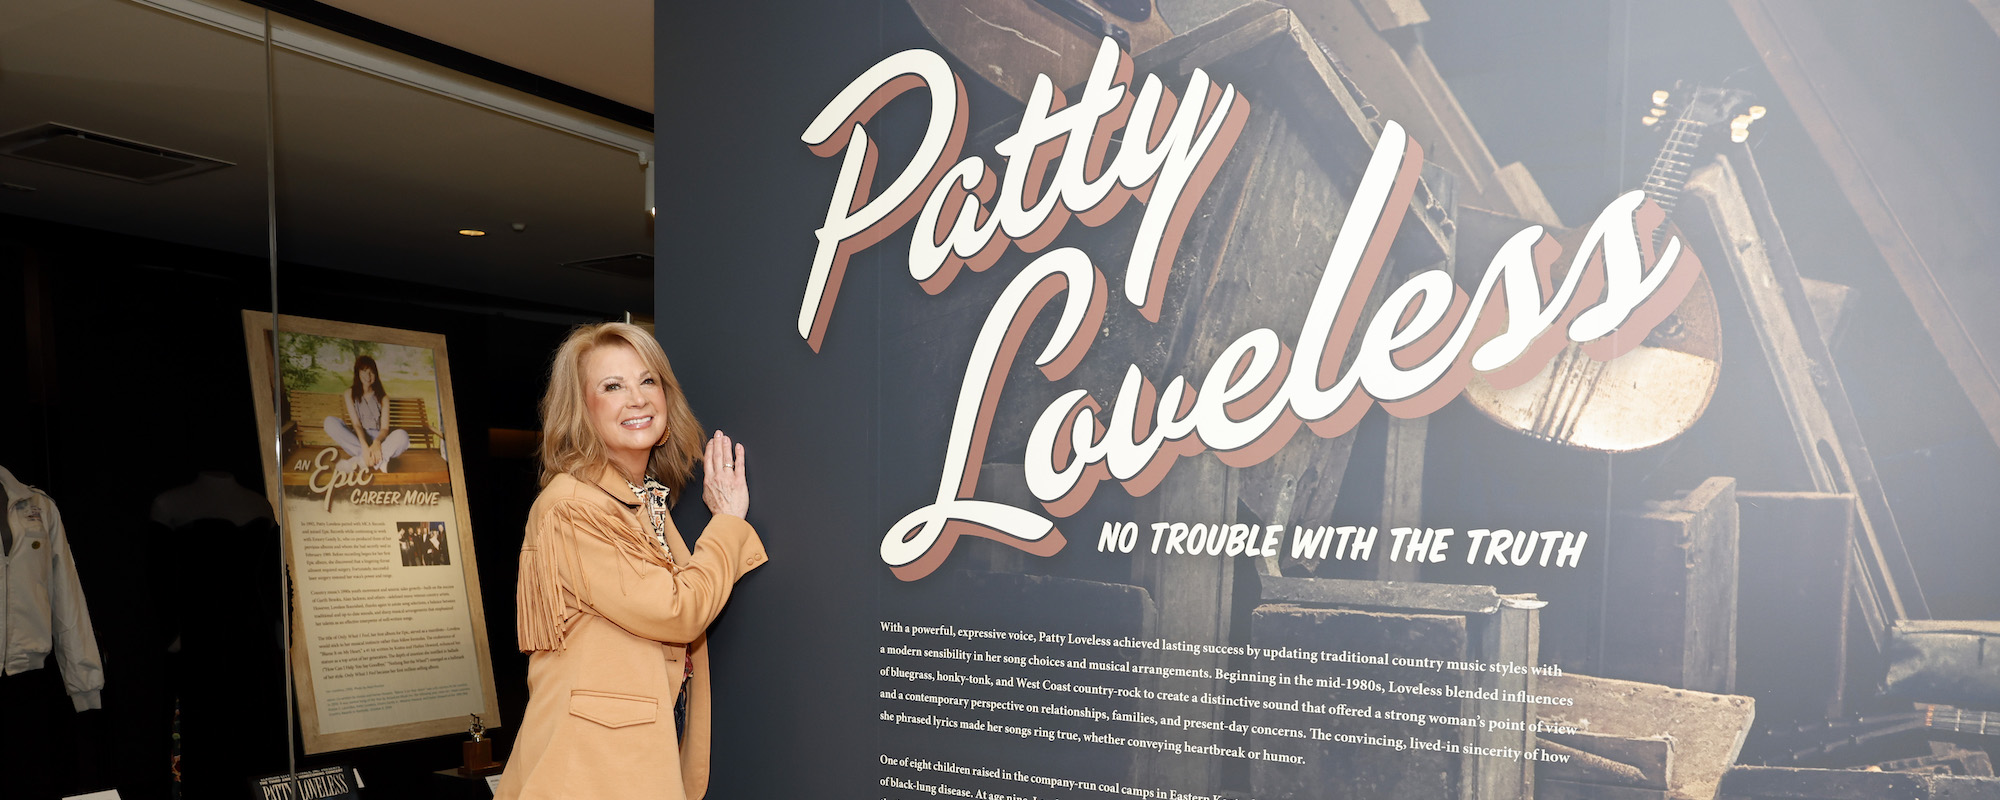 Patty Loveless Comes “Full Circle” with New Country Music Hall of Fame Exhibit